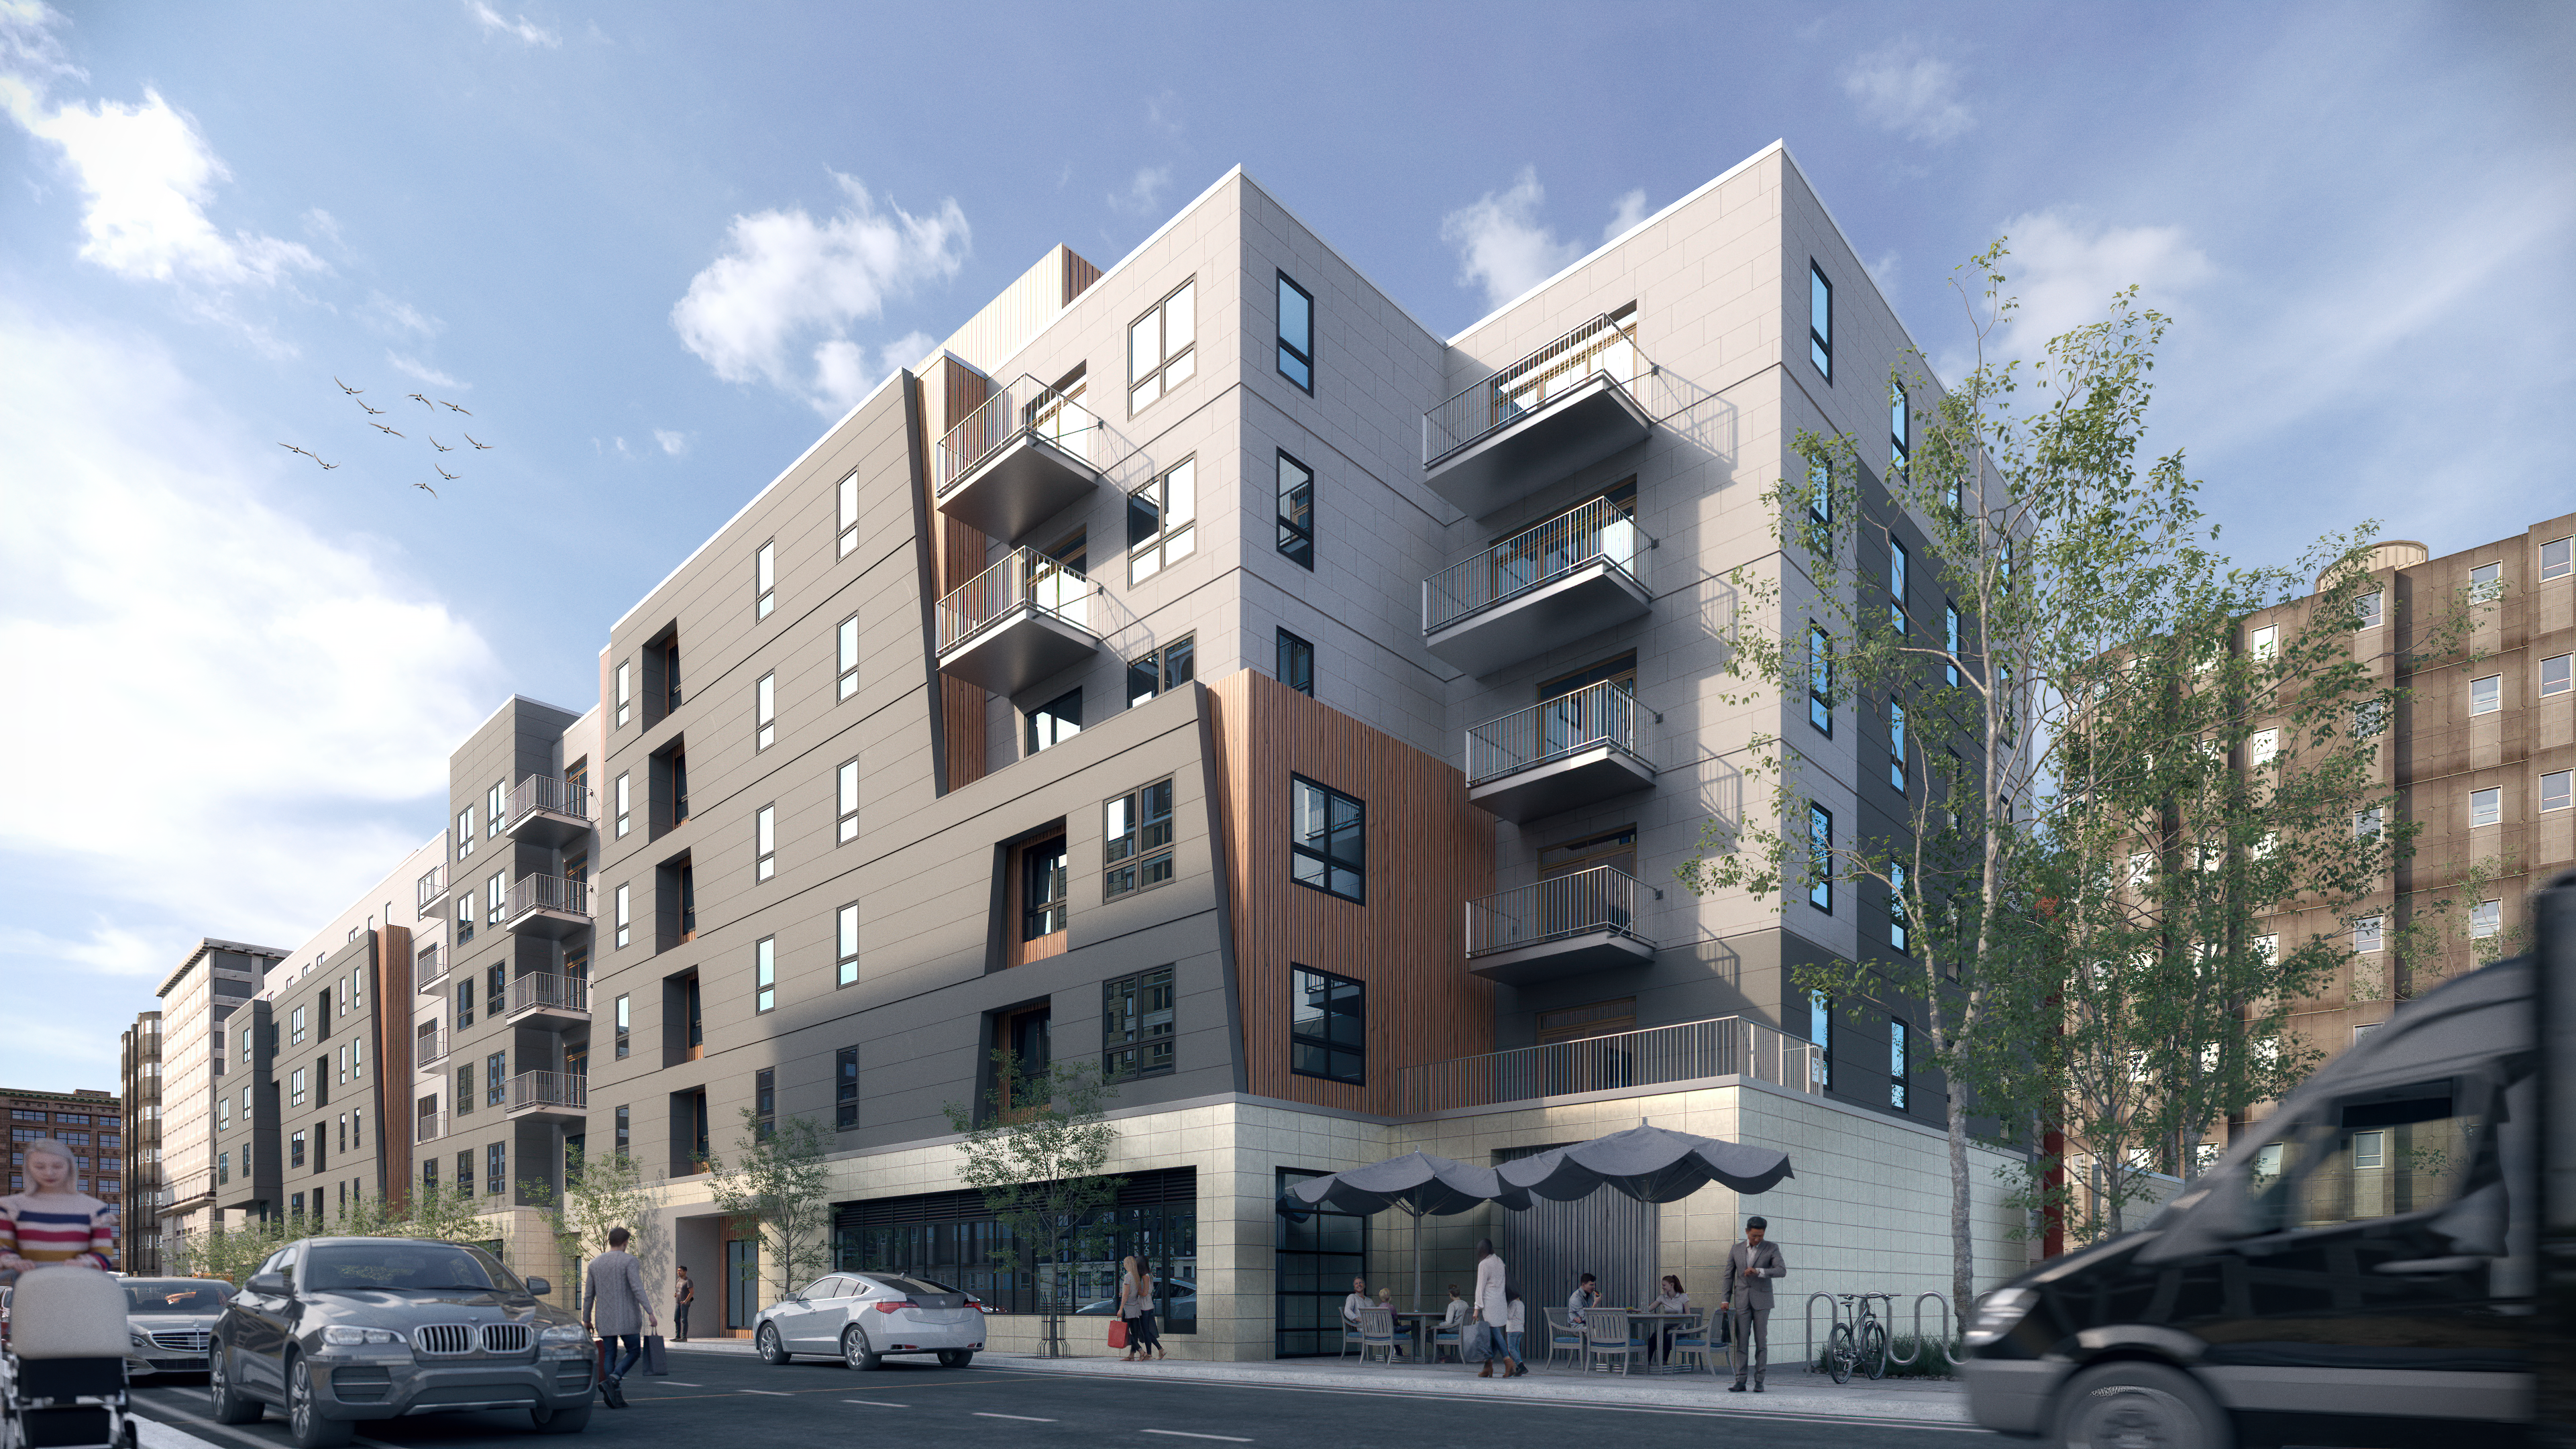 A New Look For Boston: Mira Brings 64 New Condos to East Boston